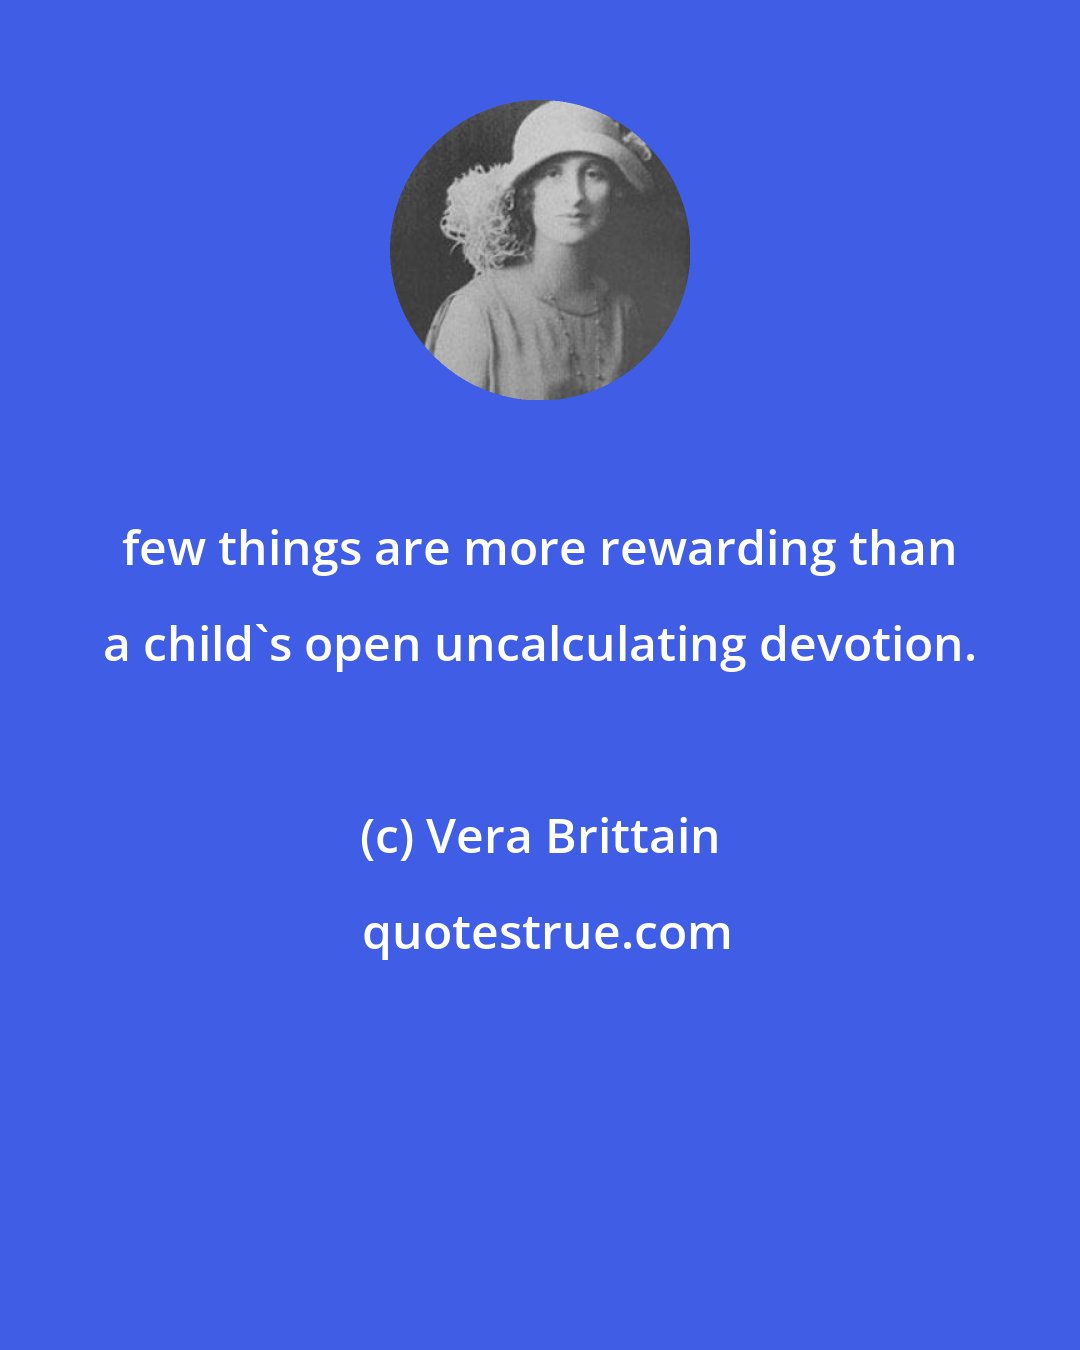 Vera Brittain: few things are more rewarding than a child's open uncalculating devotion.